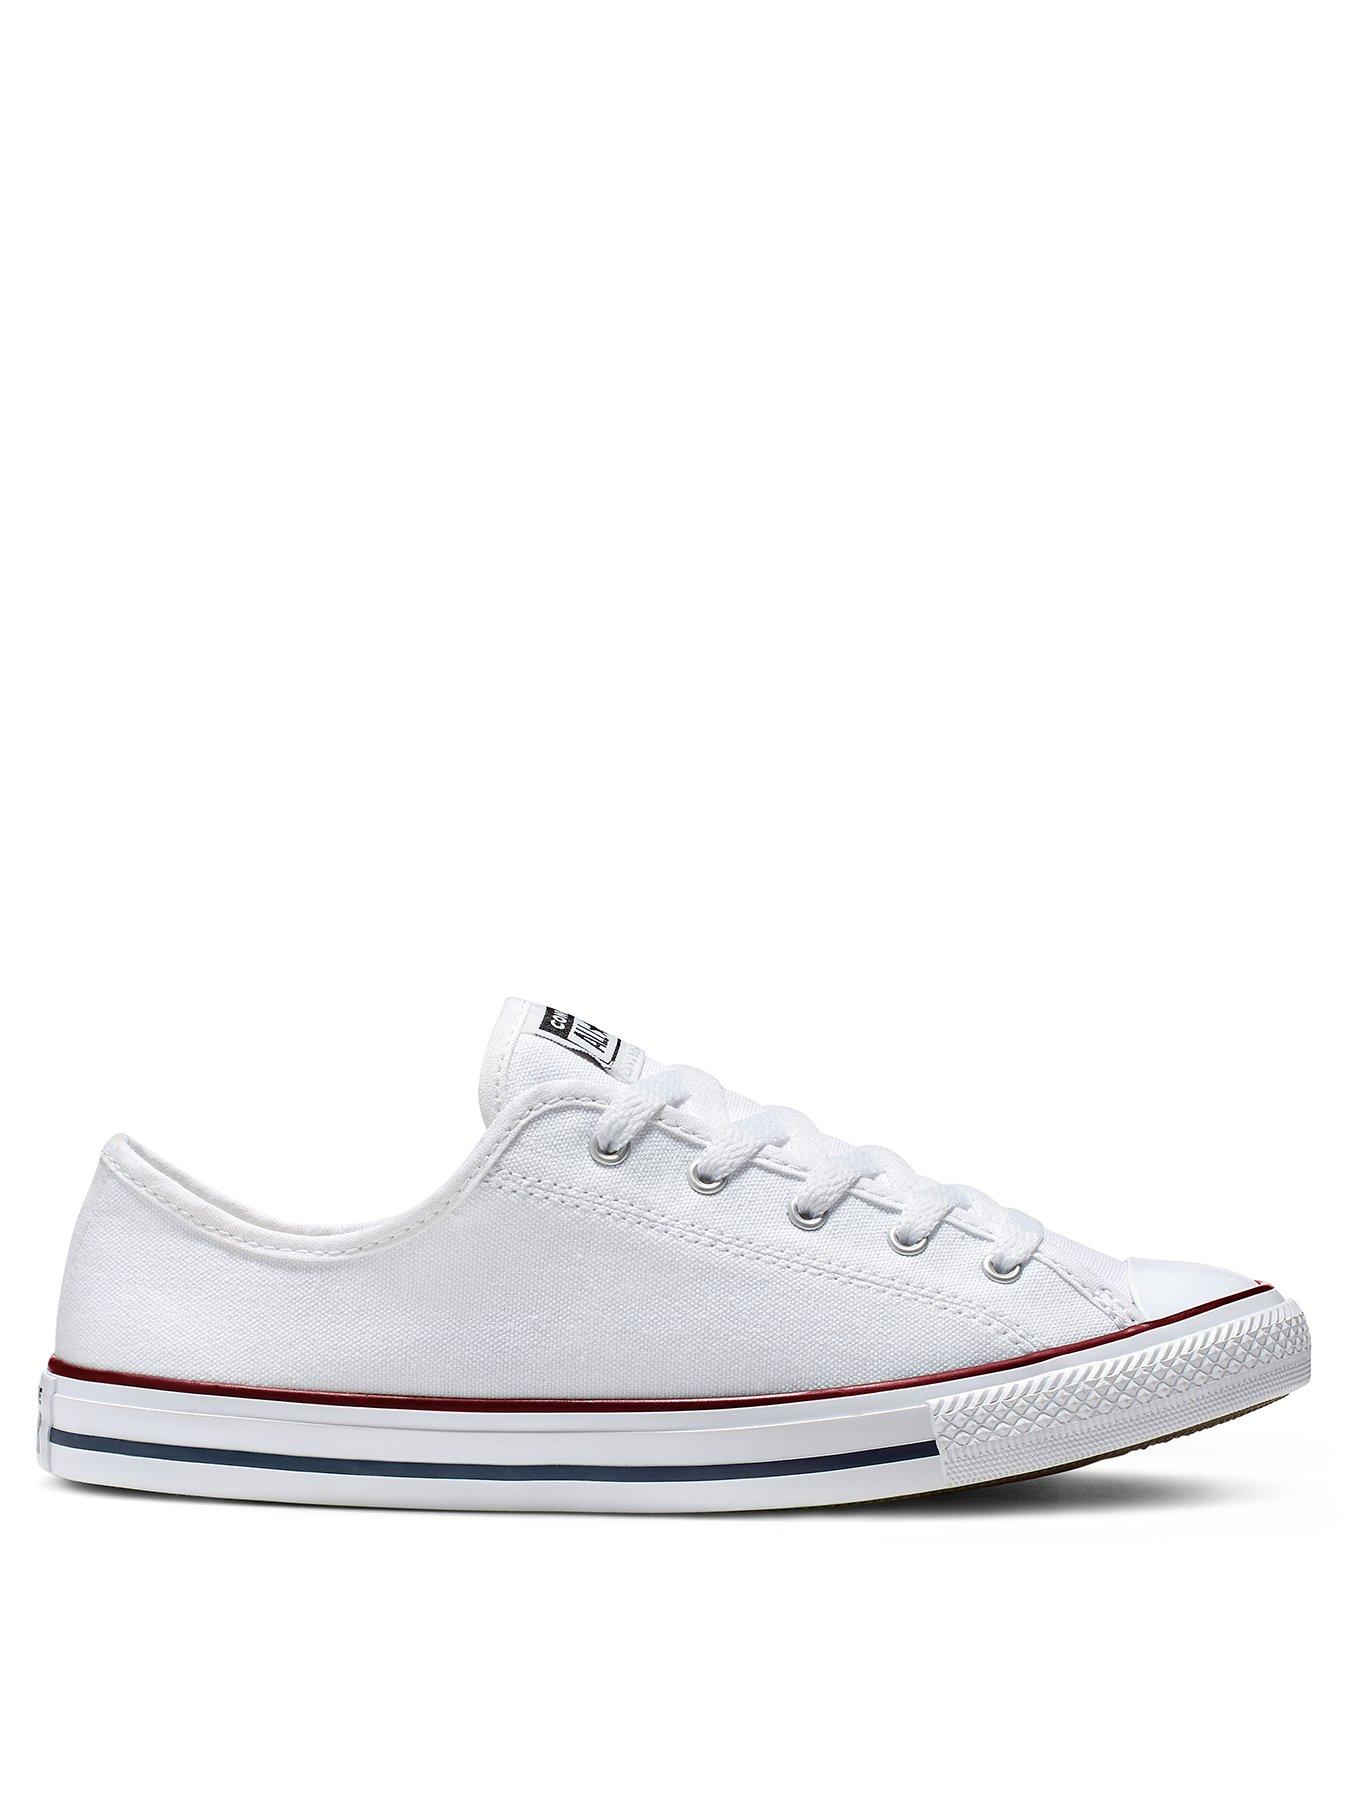 converse dainty leather